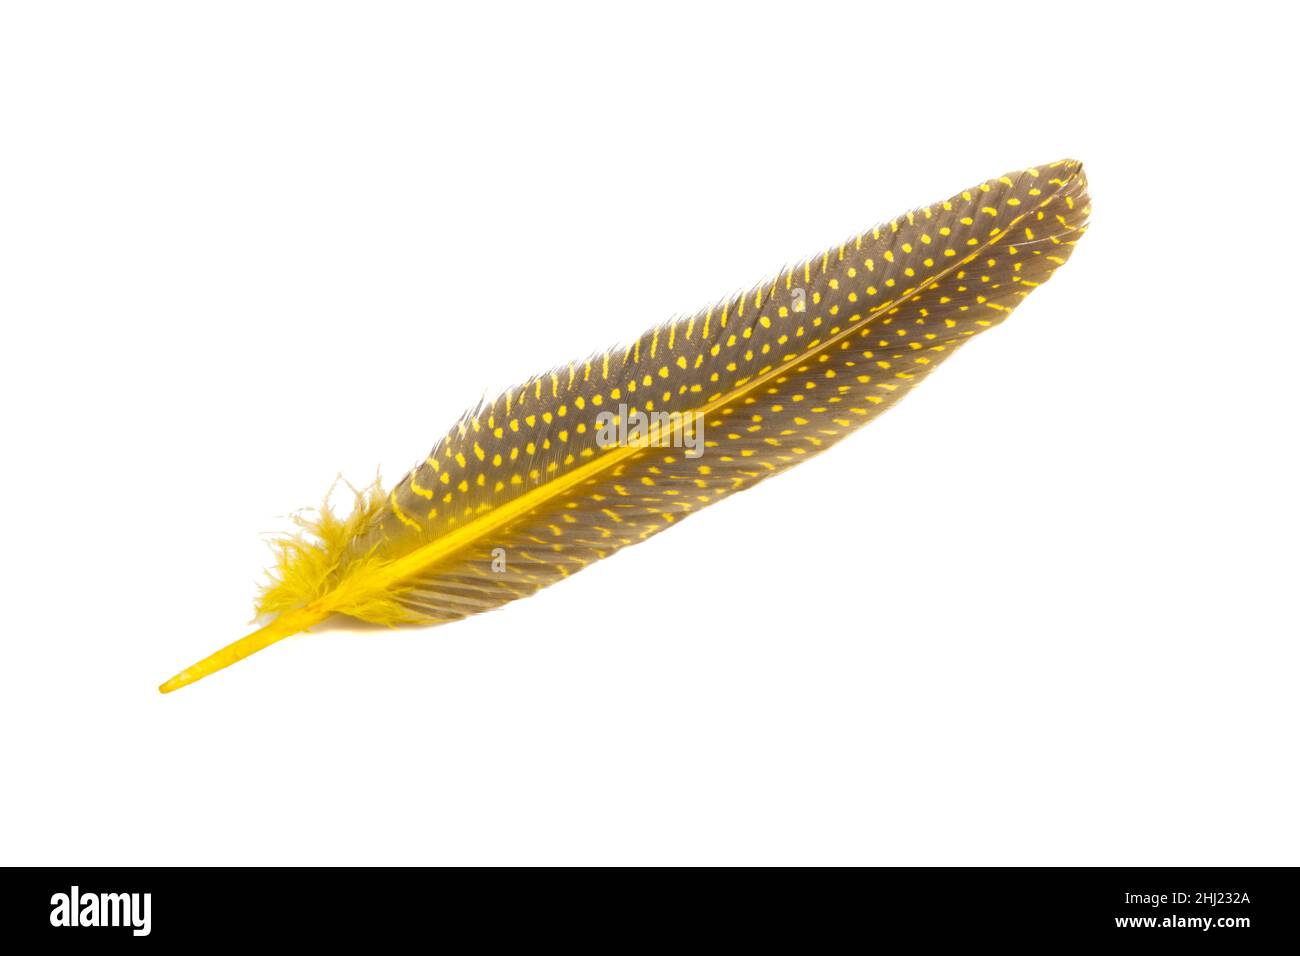 yellow fluffy decorative bird feather isolated on the white Stock Photo